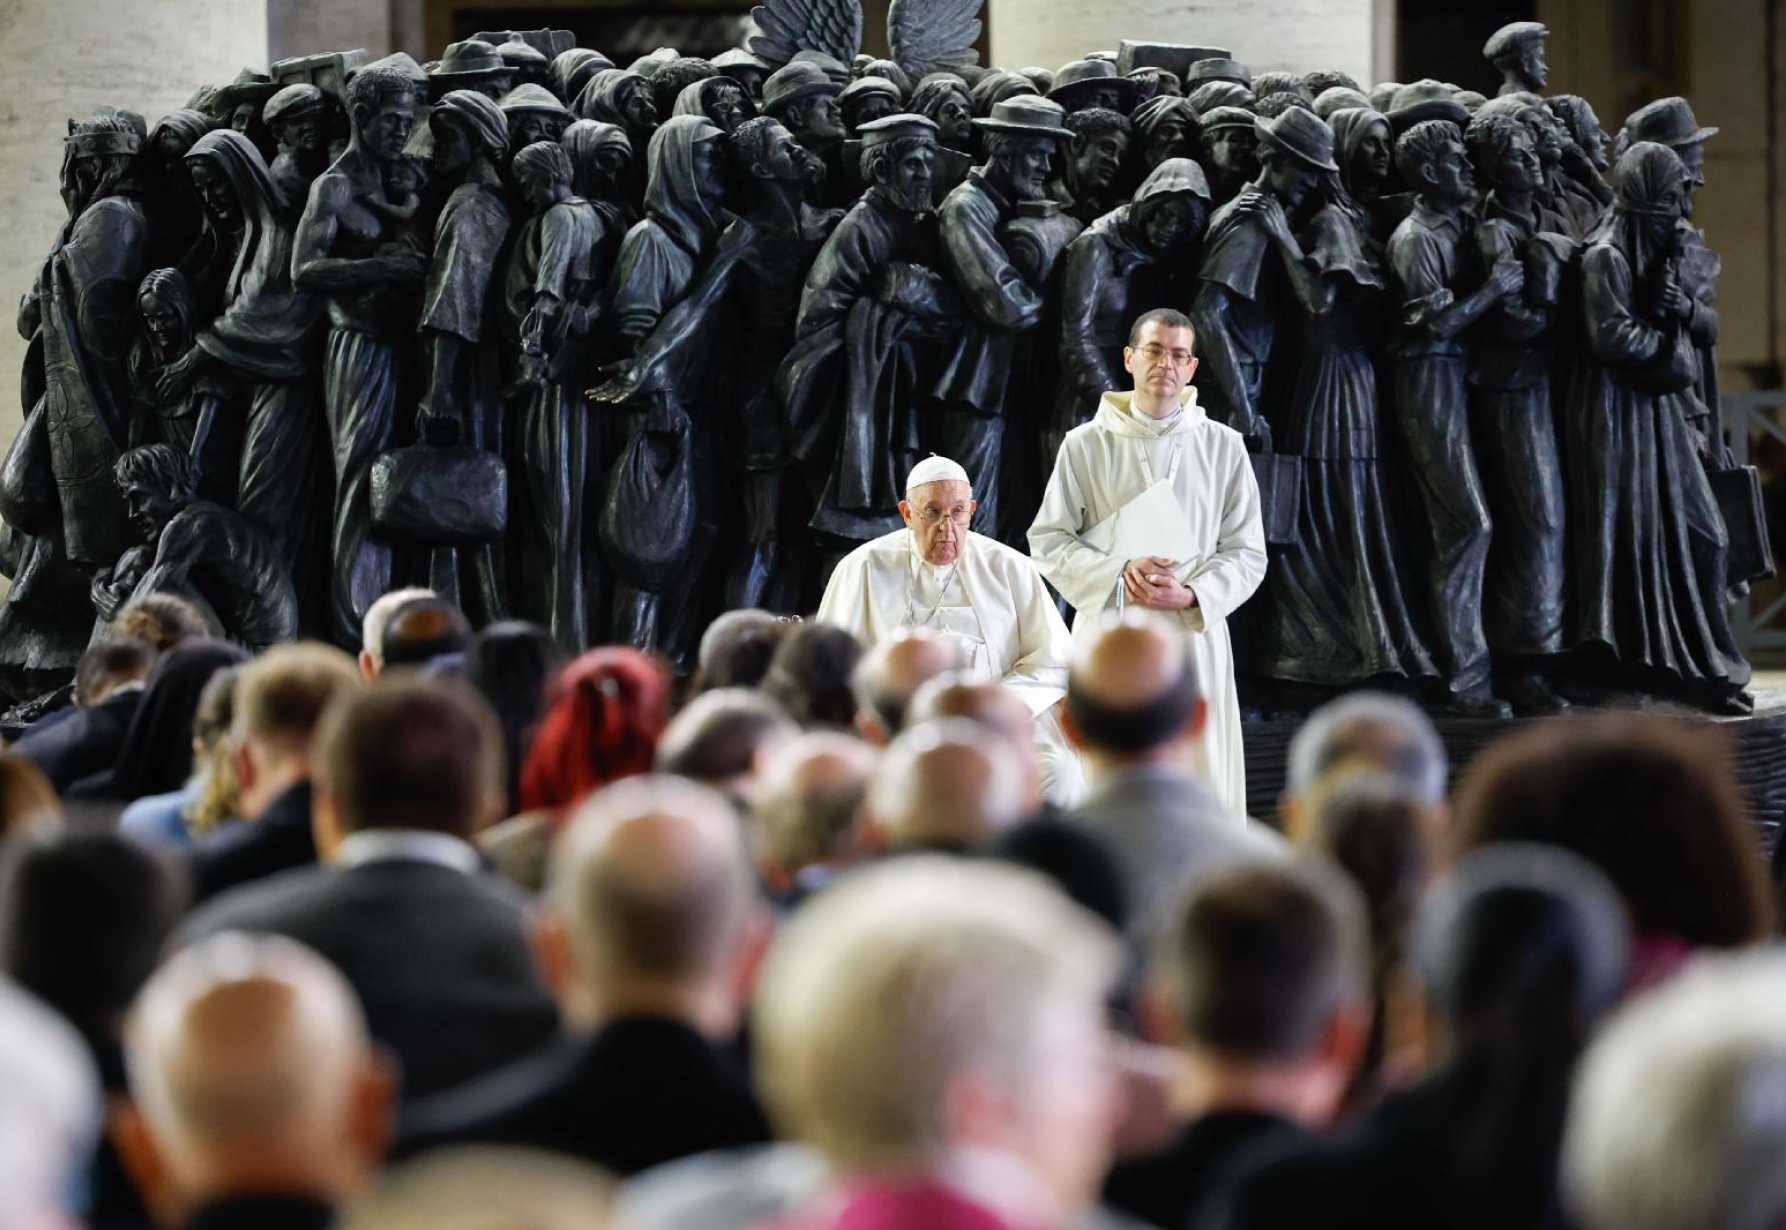 At synod prayer service, pope calls for immigration reform with a heart